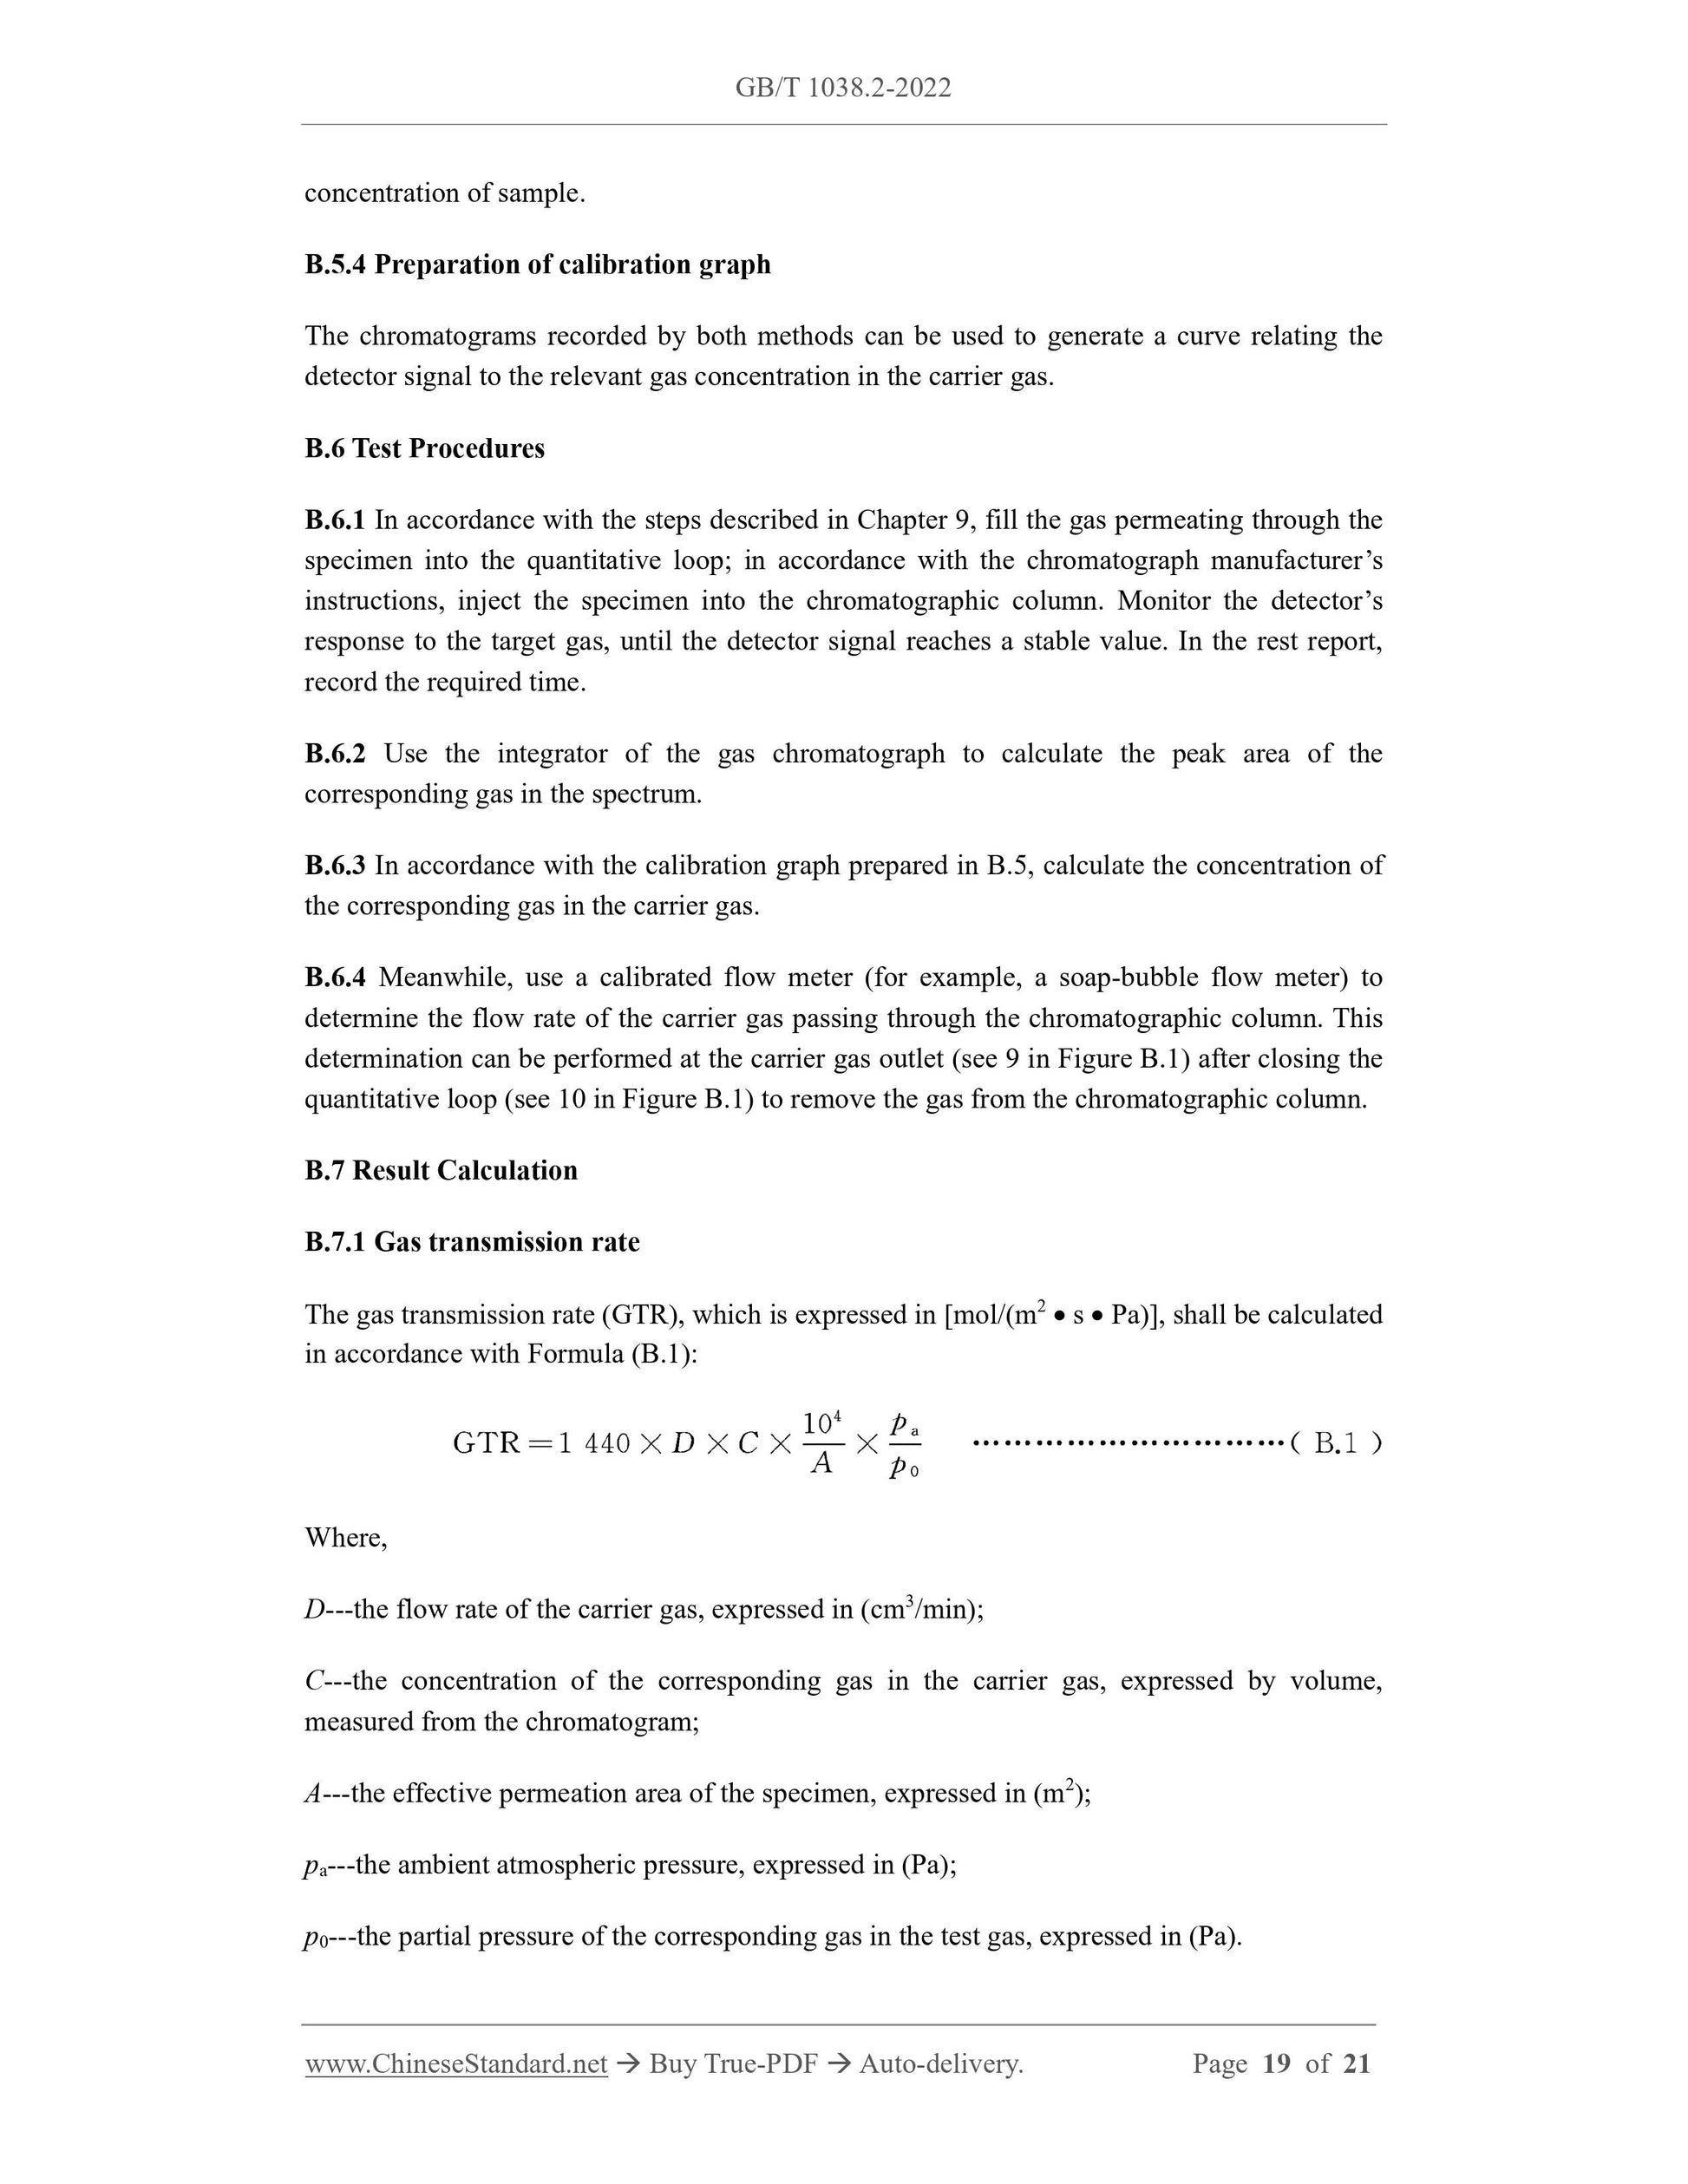 GB/T 1038.2-2022 Page 11